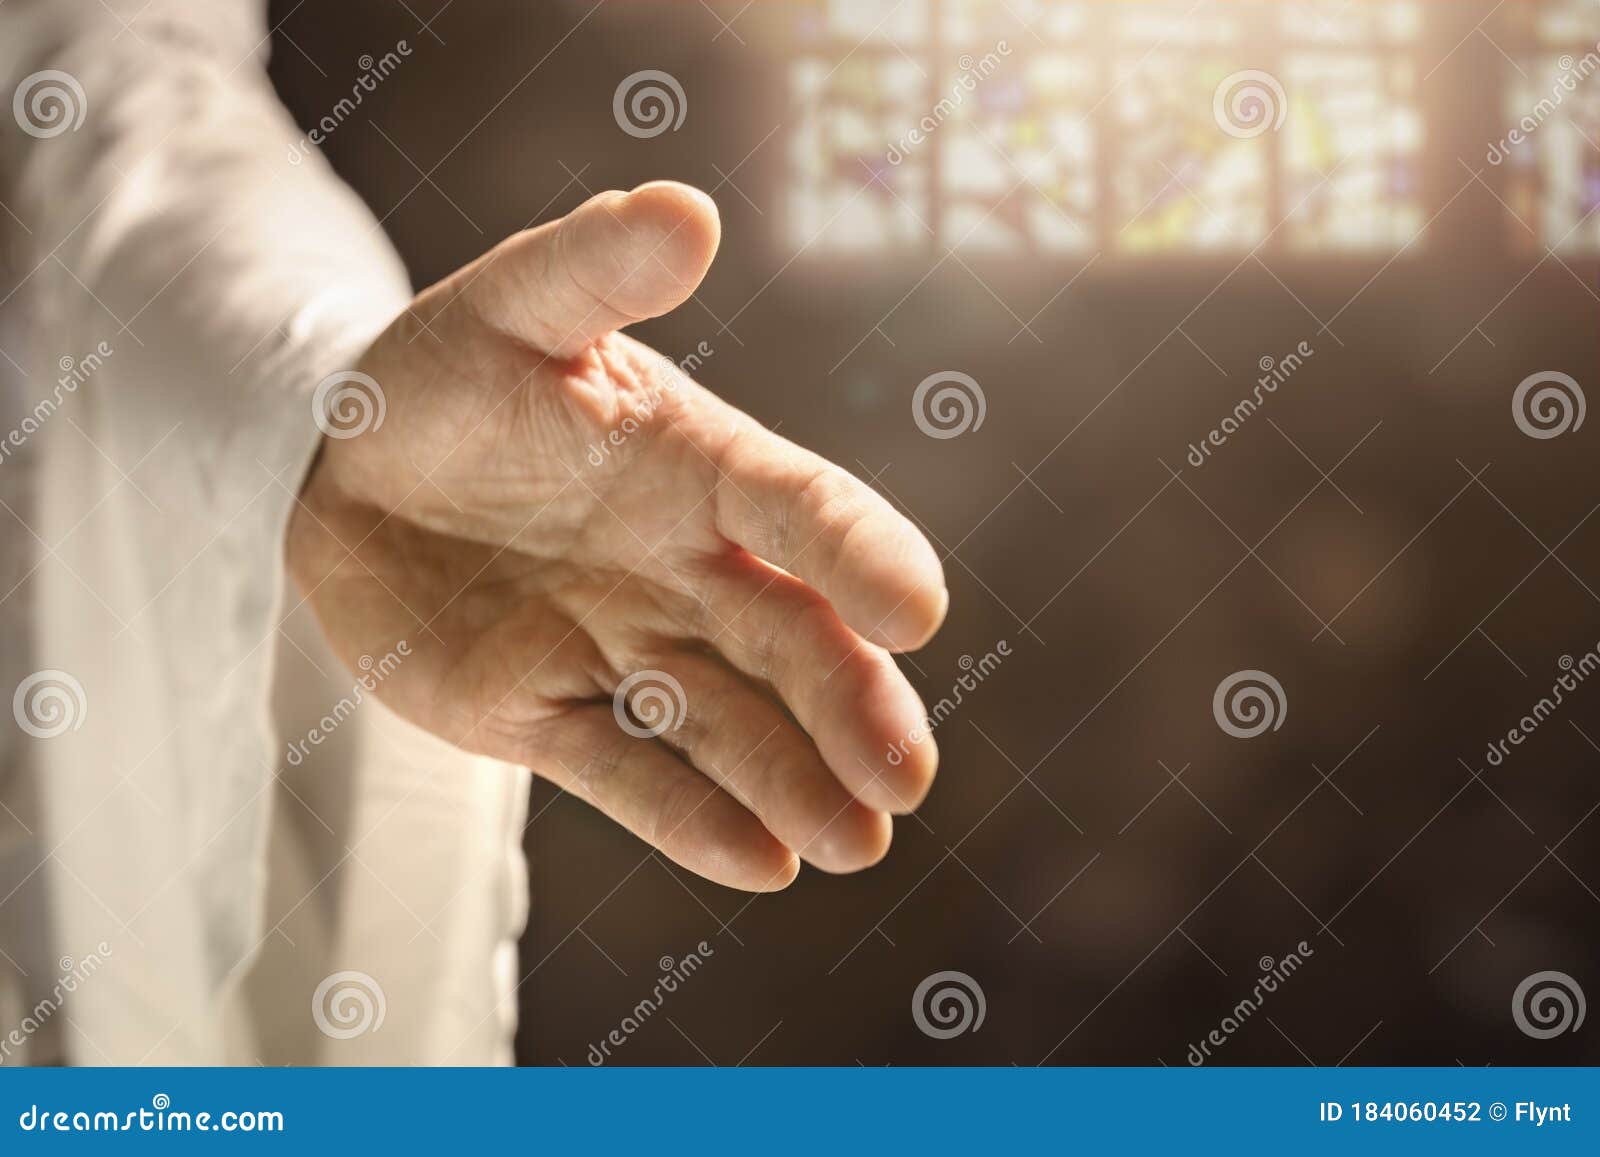 Details about   HAND OF JESUS Reprint Jesus Christ Putting Out His Hand For Those That Believe P 